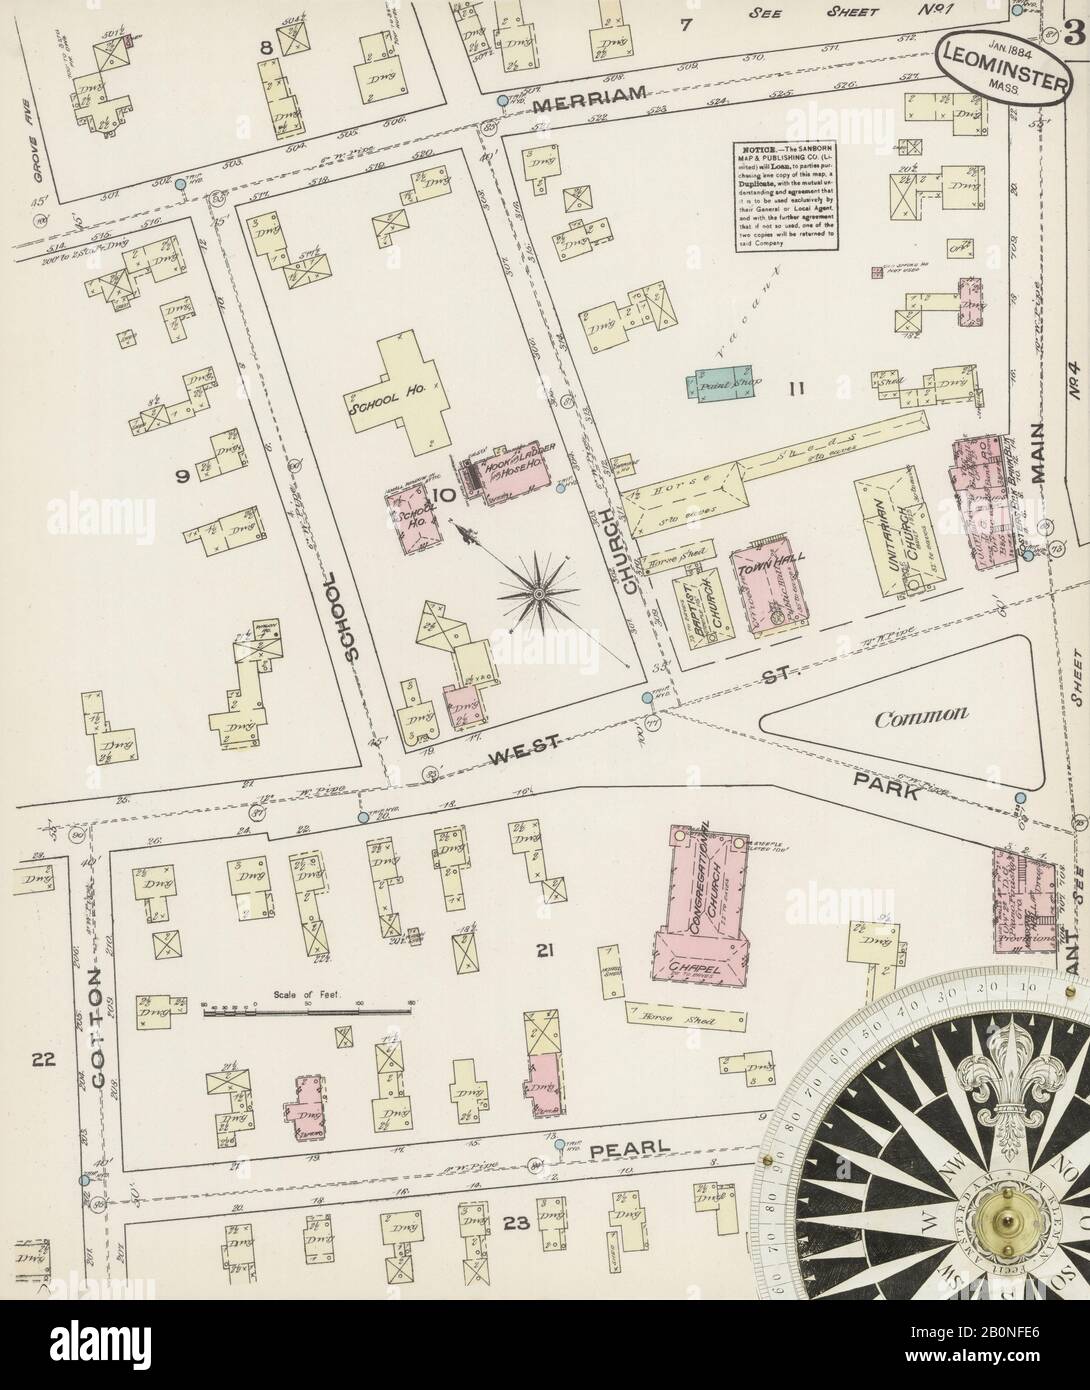 Image 3 of Sanborn Fire Insurance Map from Leominster, Worcester County, Massachusetts. Jan 1884. 7 Sheet(s), America, street map with a Nineteenth Century compass Stock Photo